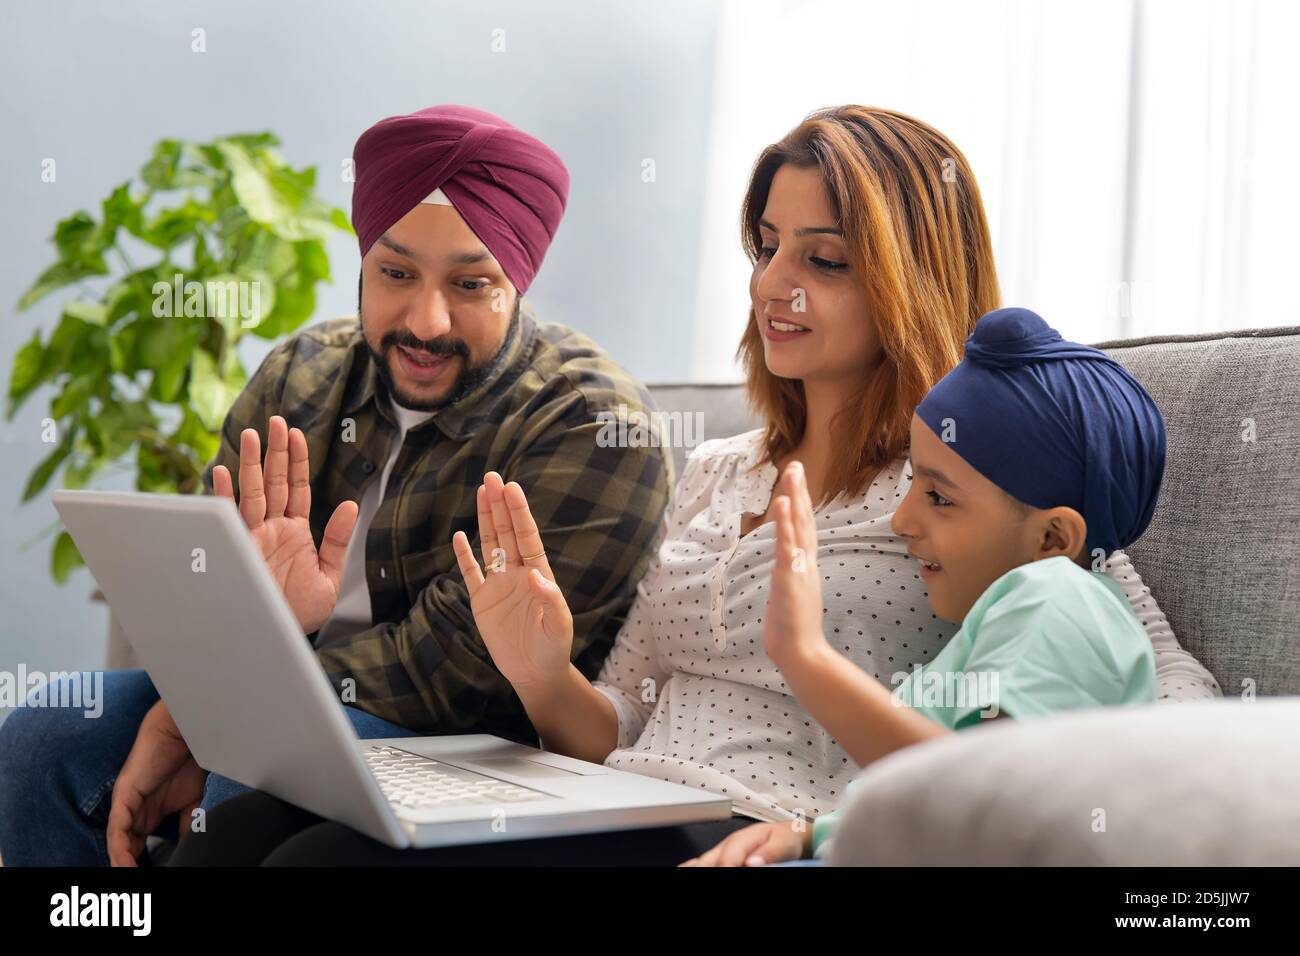 A SIKH FAMILY TALKING TO FRIENDS OVER VIDEO CONFERENCING IN A LAPTOP Stock Photo